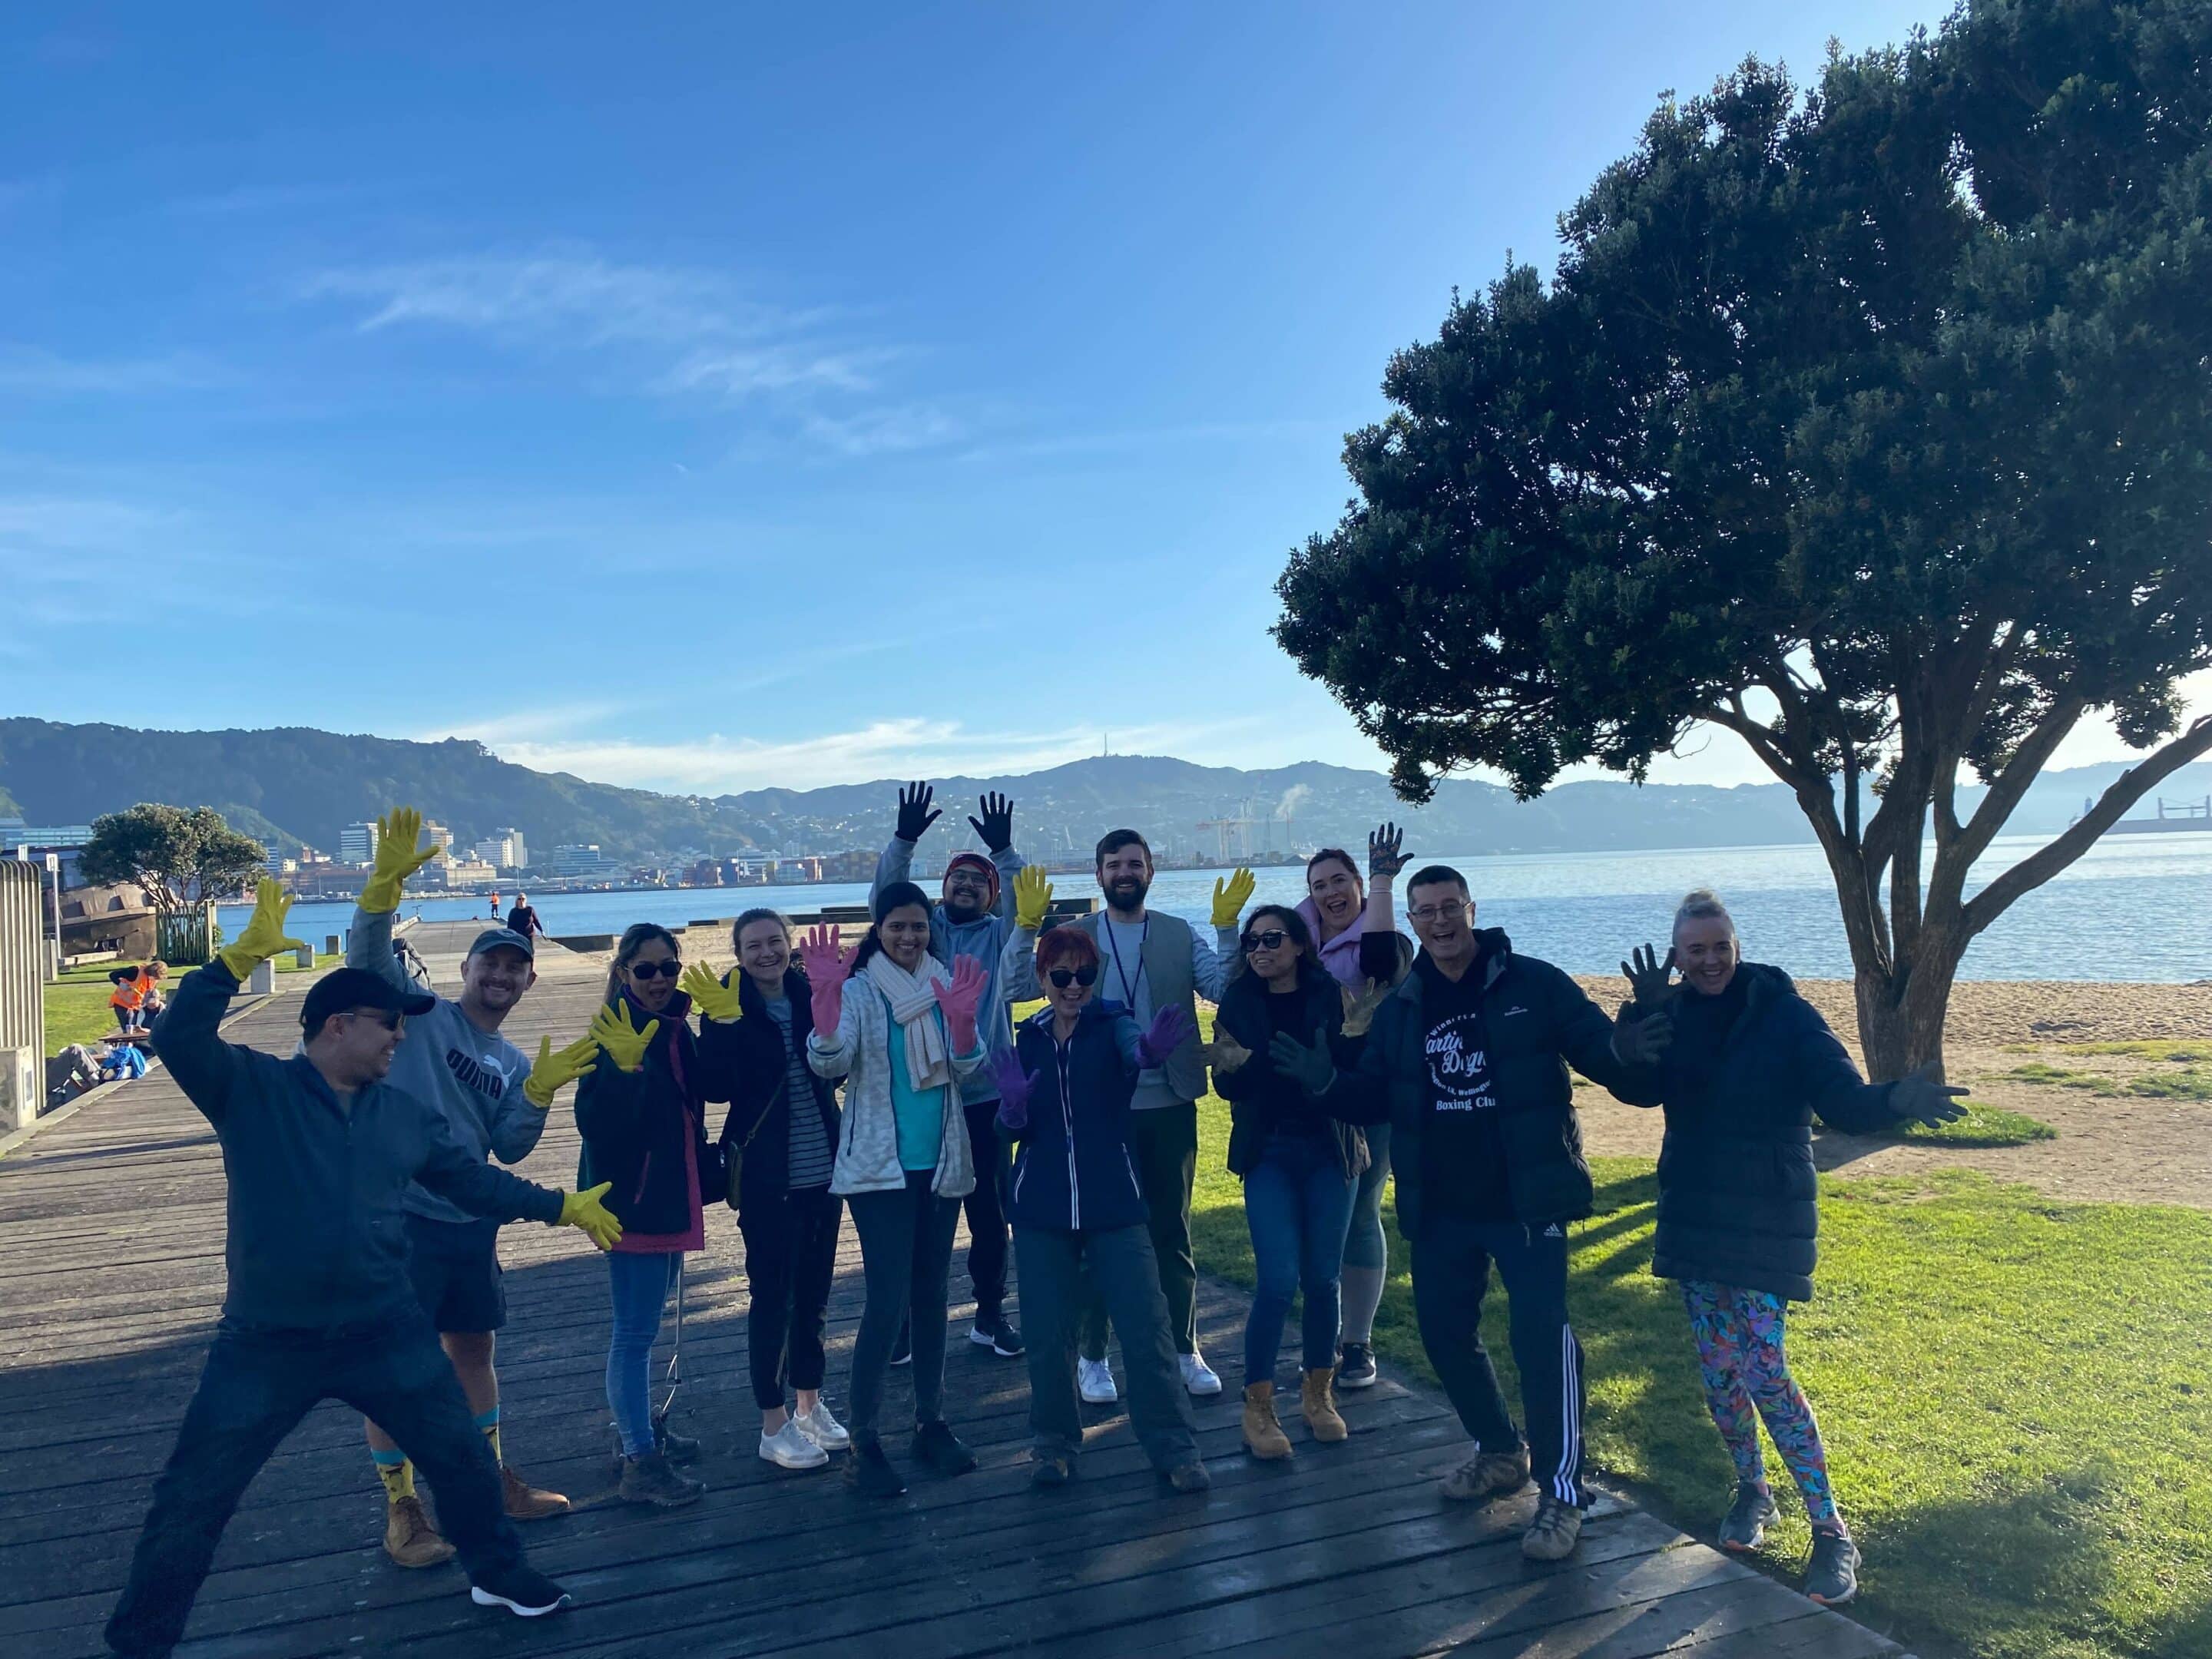 The Thankyou Payroll Wellngton Office volunteering in Oriental Bay